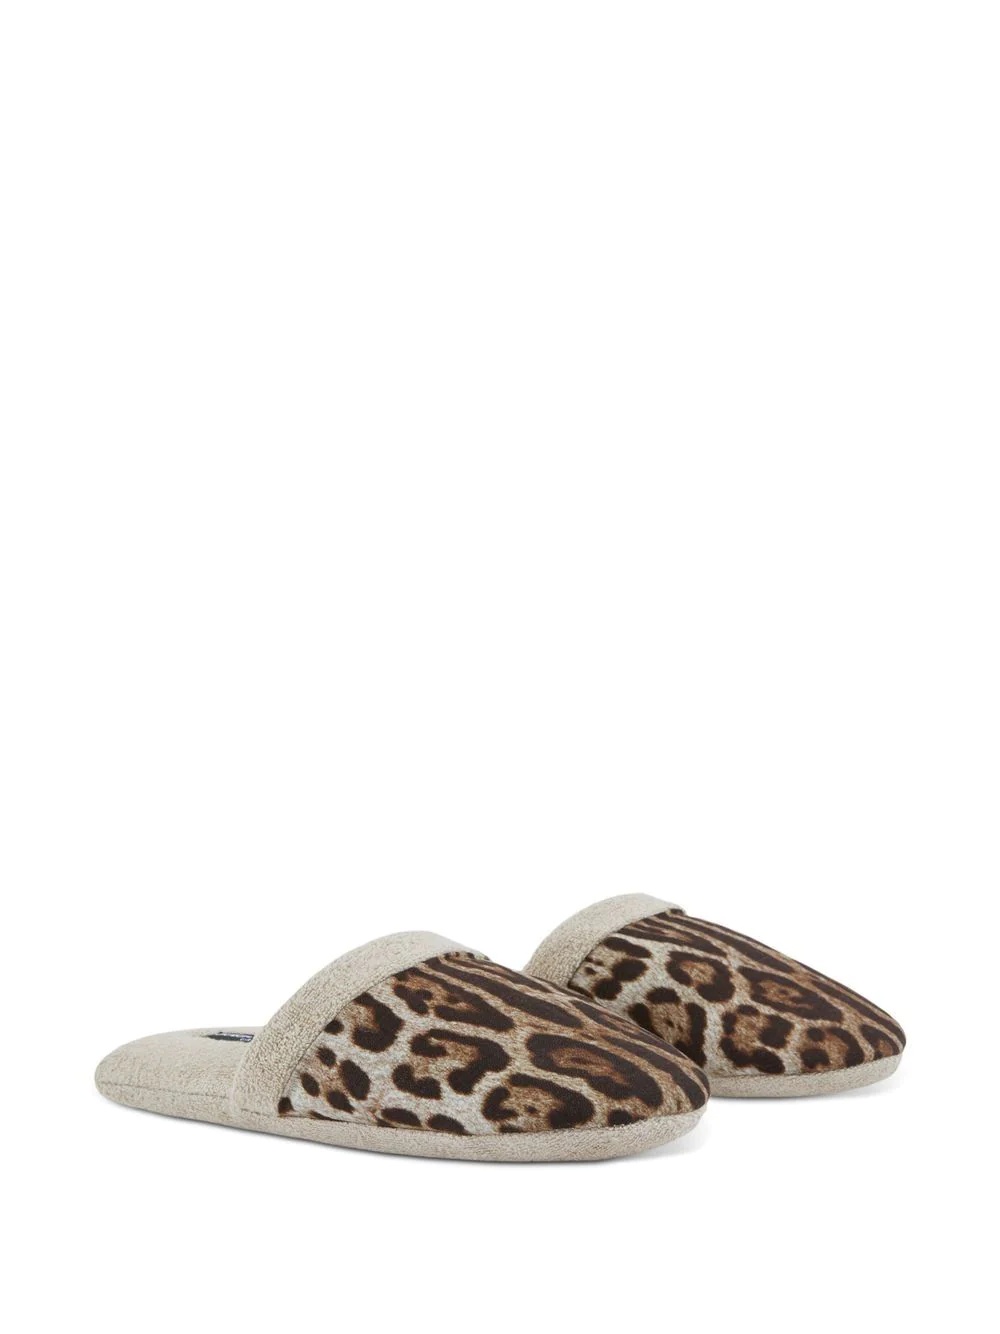 leopard-print terry slippers - 2